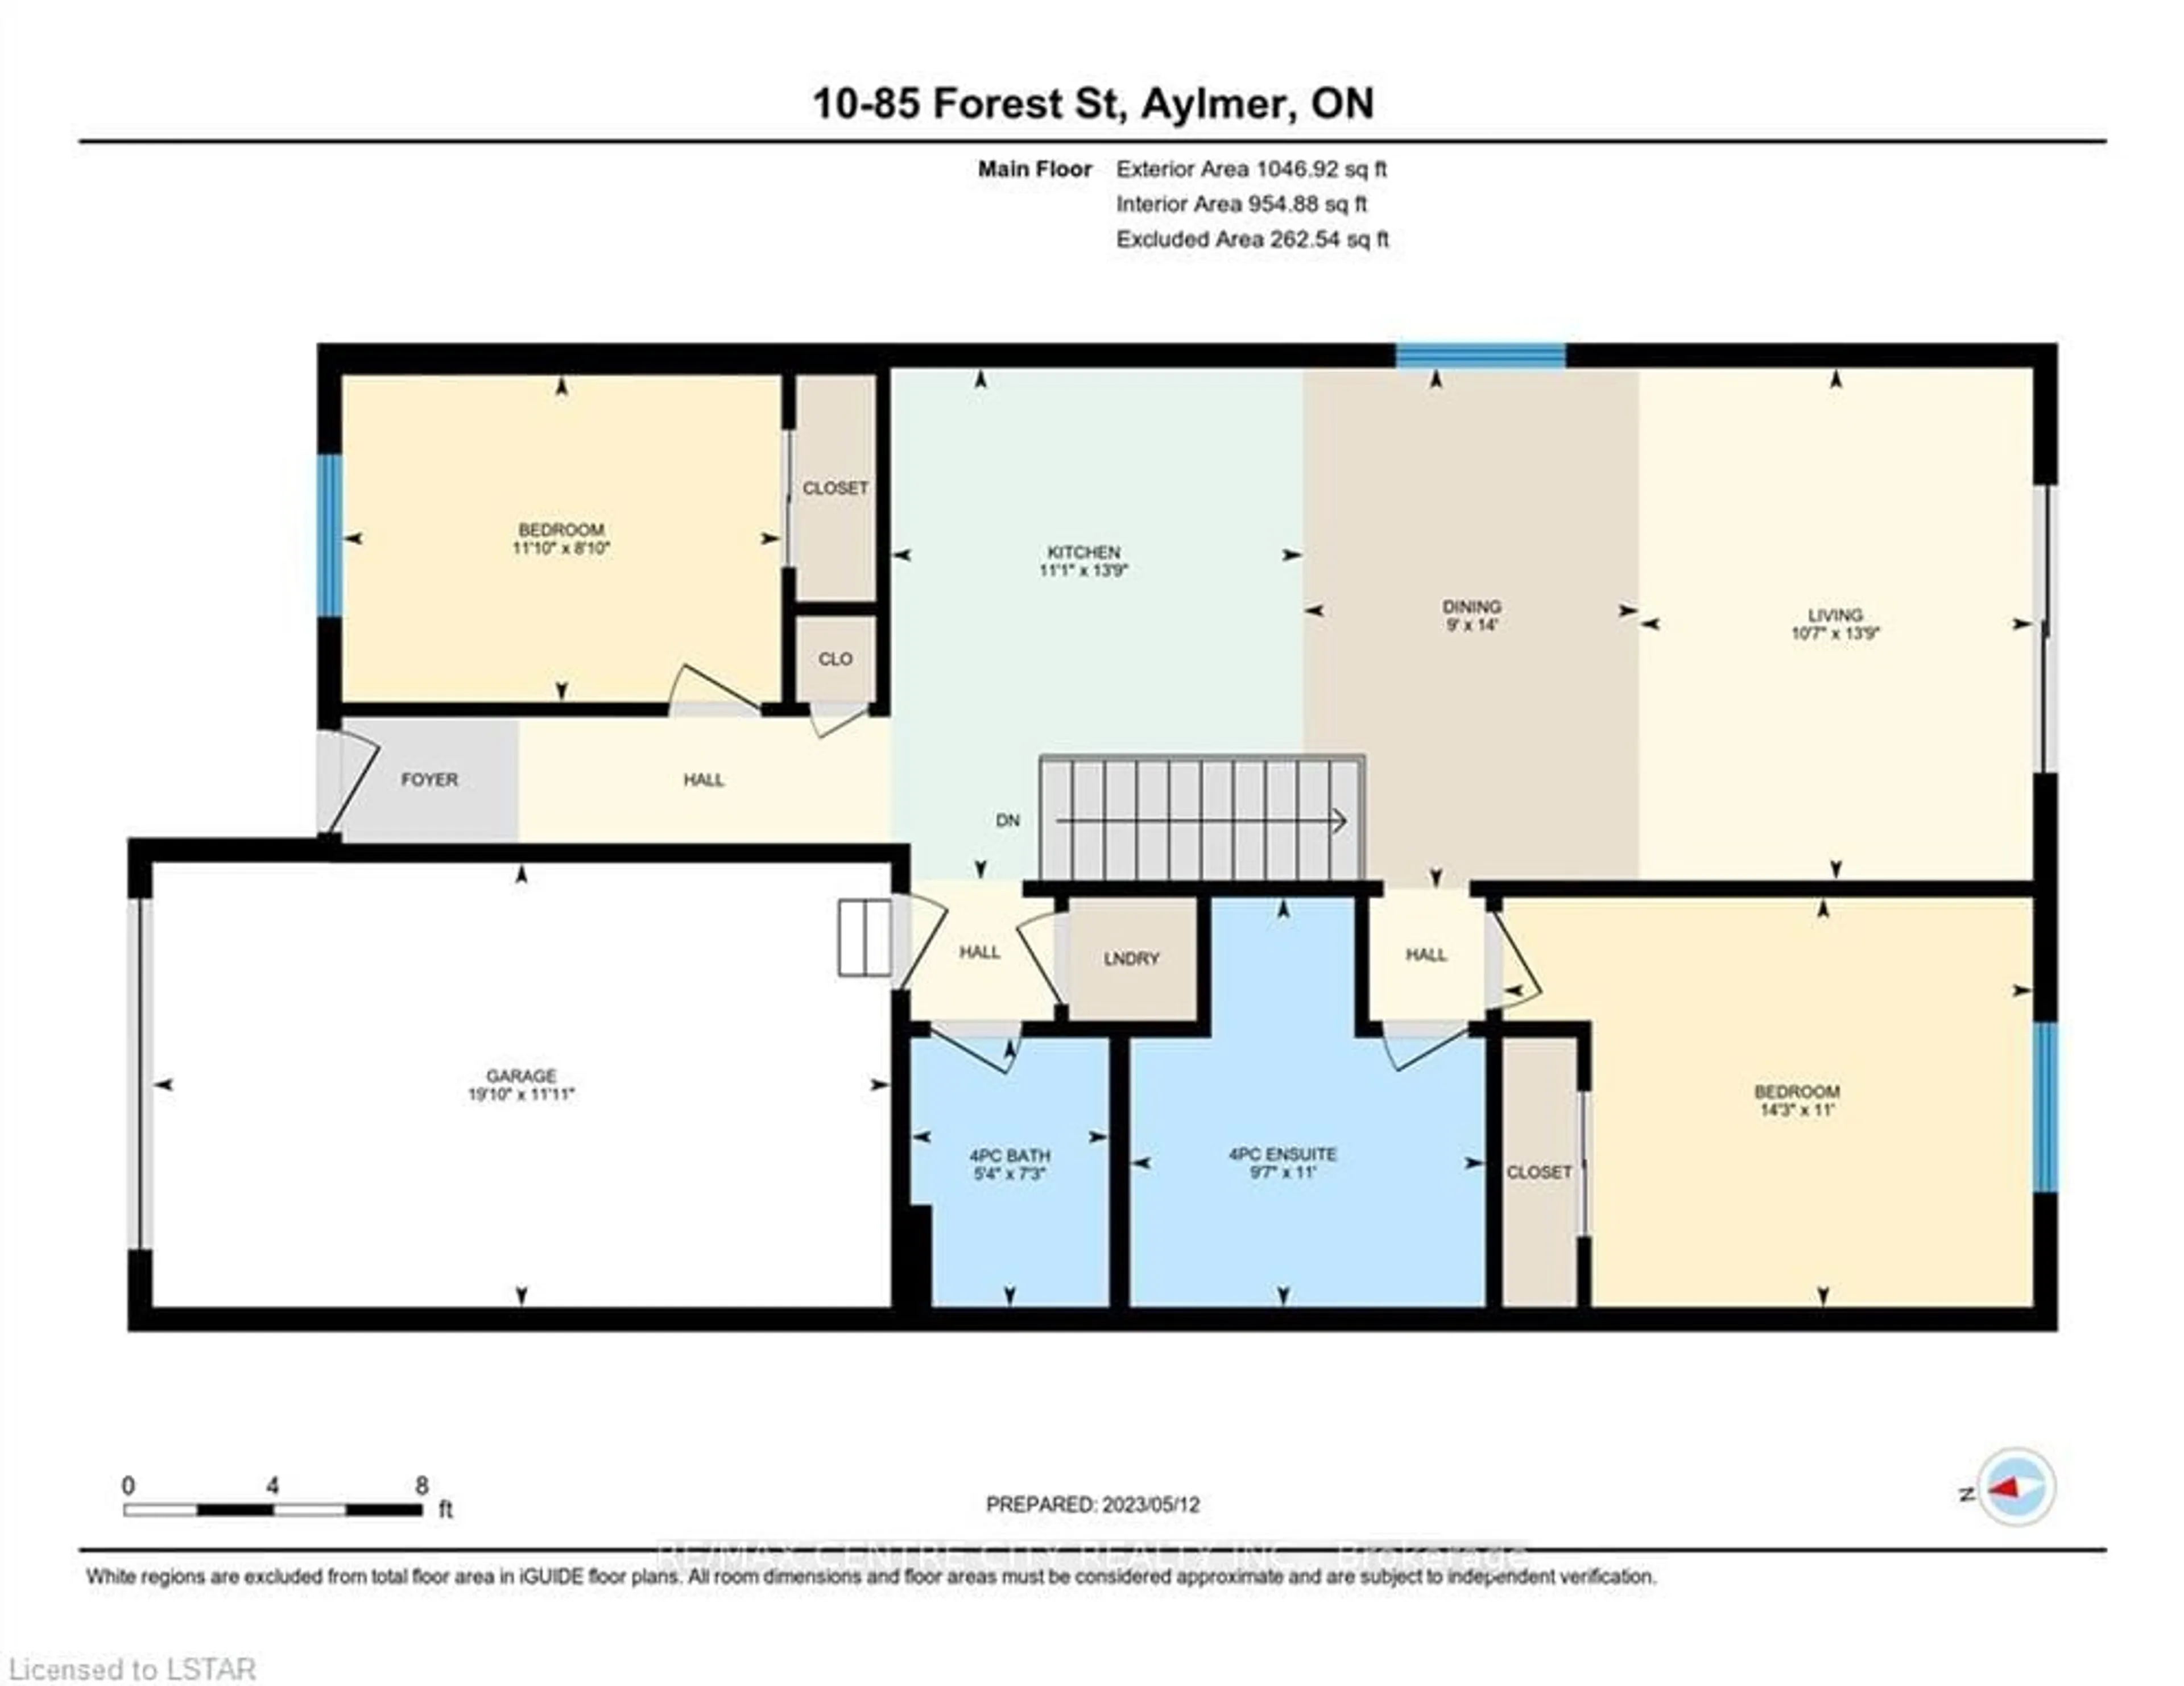 Floor plan for 85 Forest St #9, Aylmer Ontario N5H 1A5